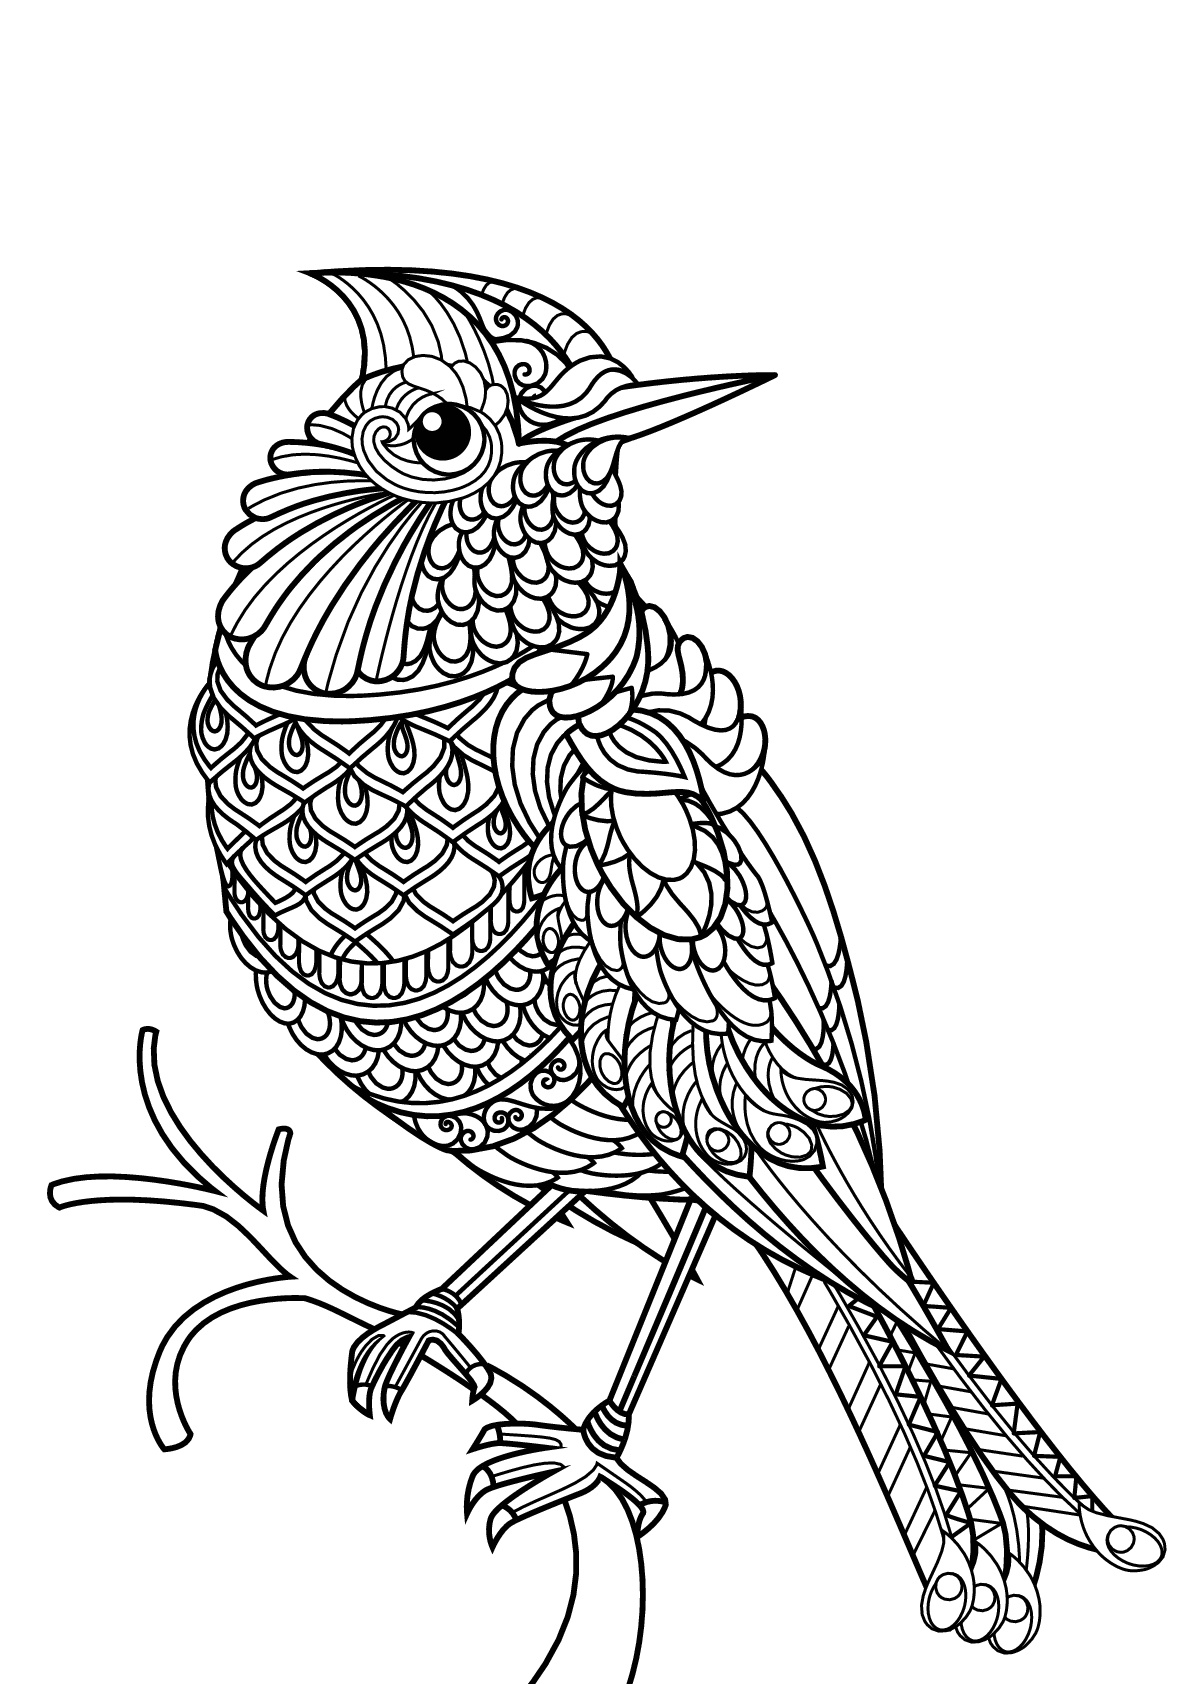 Download Free Book Bird Birds Adult Coloring Pages